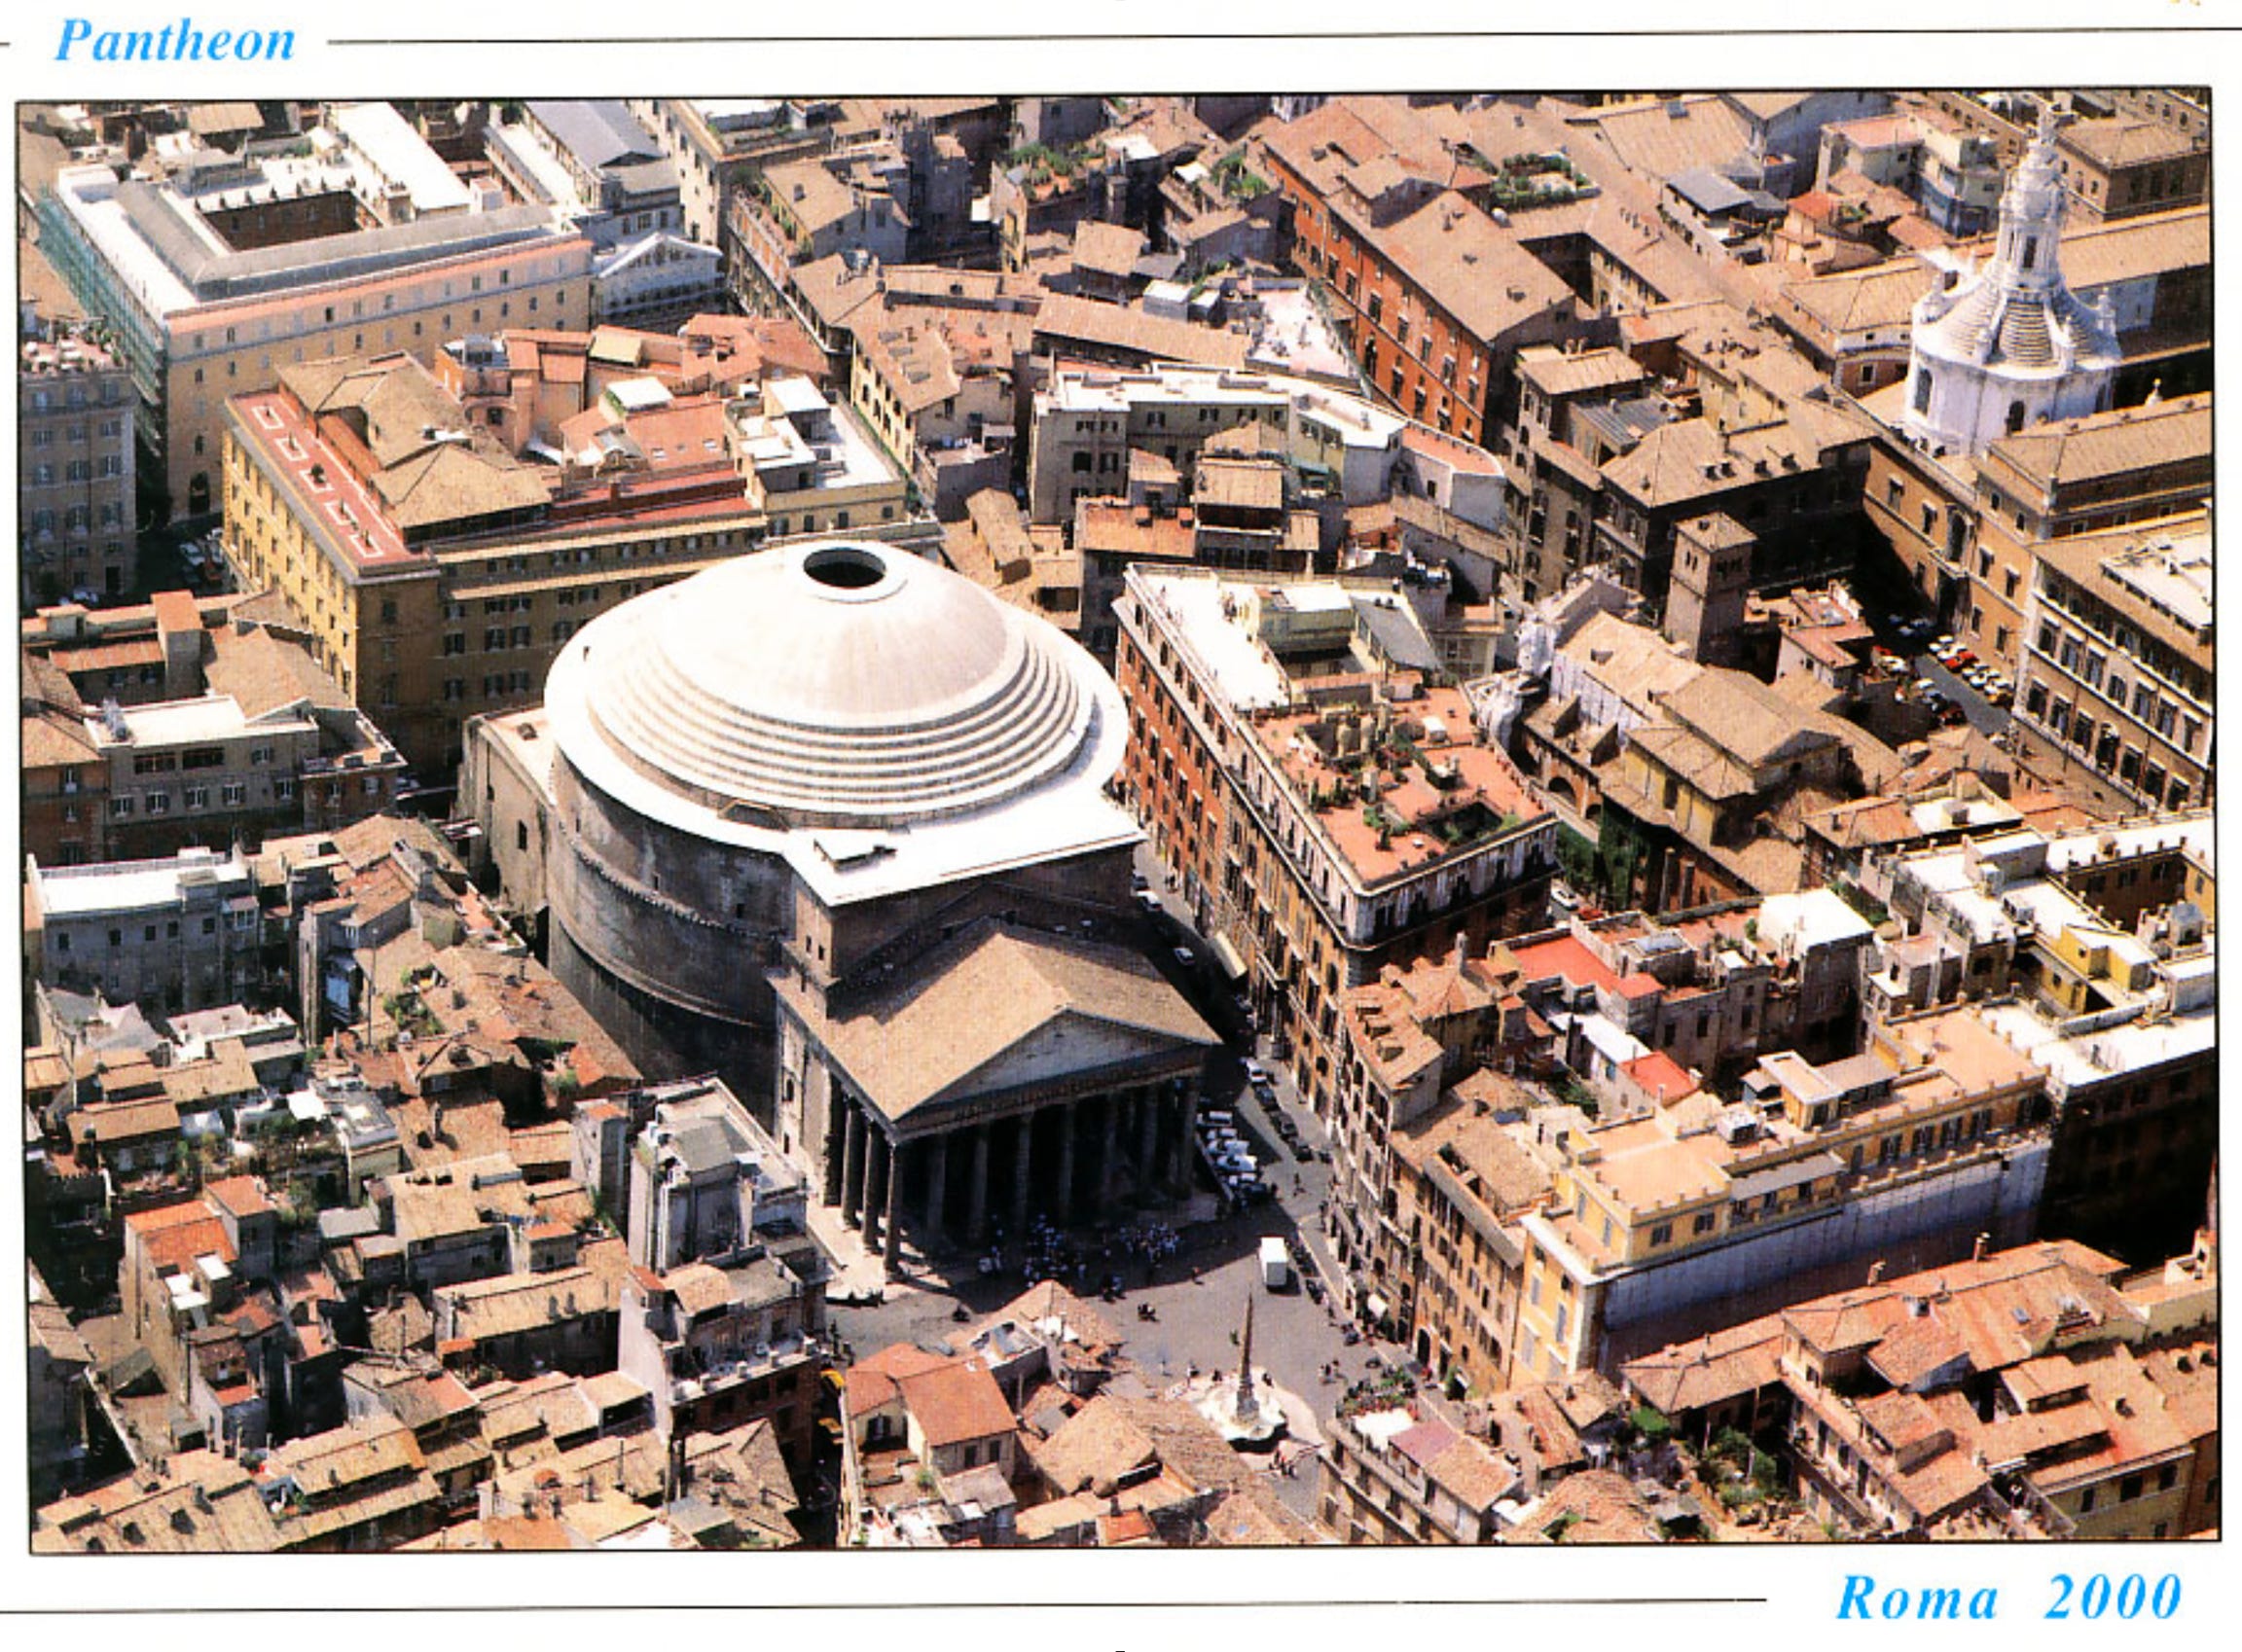 Postcard of the Pantheon in Rome dated 2000 he Temple is illuminated solely by the passage of natural light through the oculus or aperture in the centre of the roof.  It is unique in being the largest circular dome of unreinforced concrete in the world. 